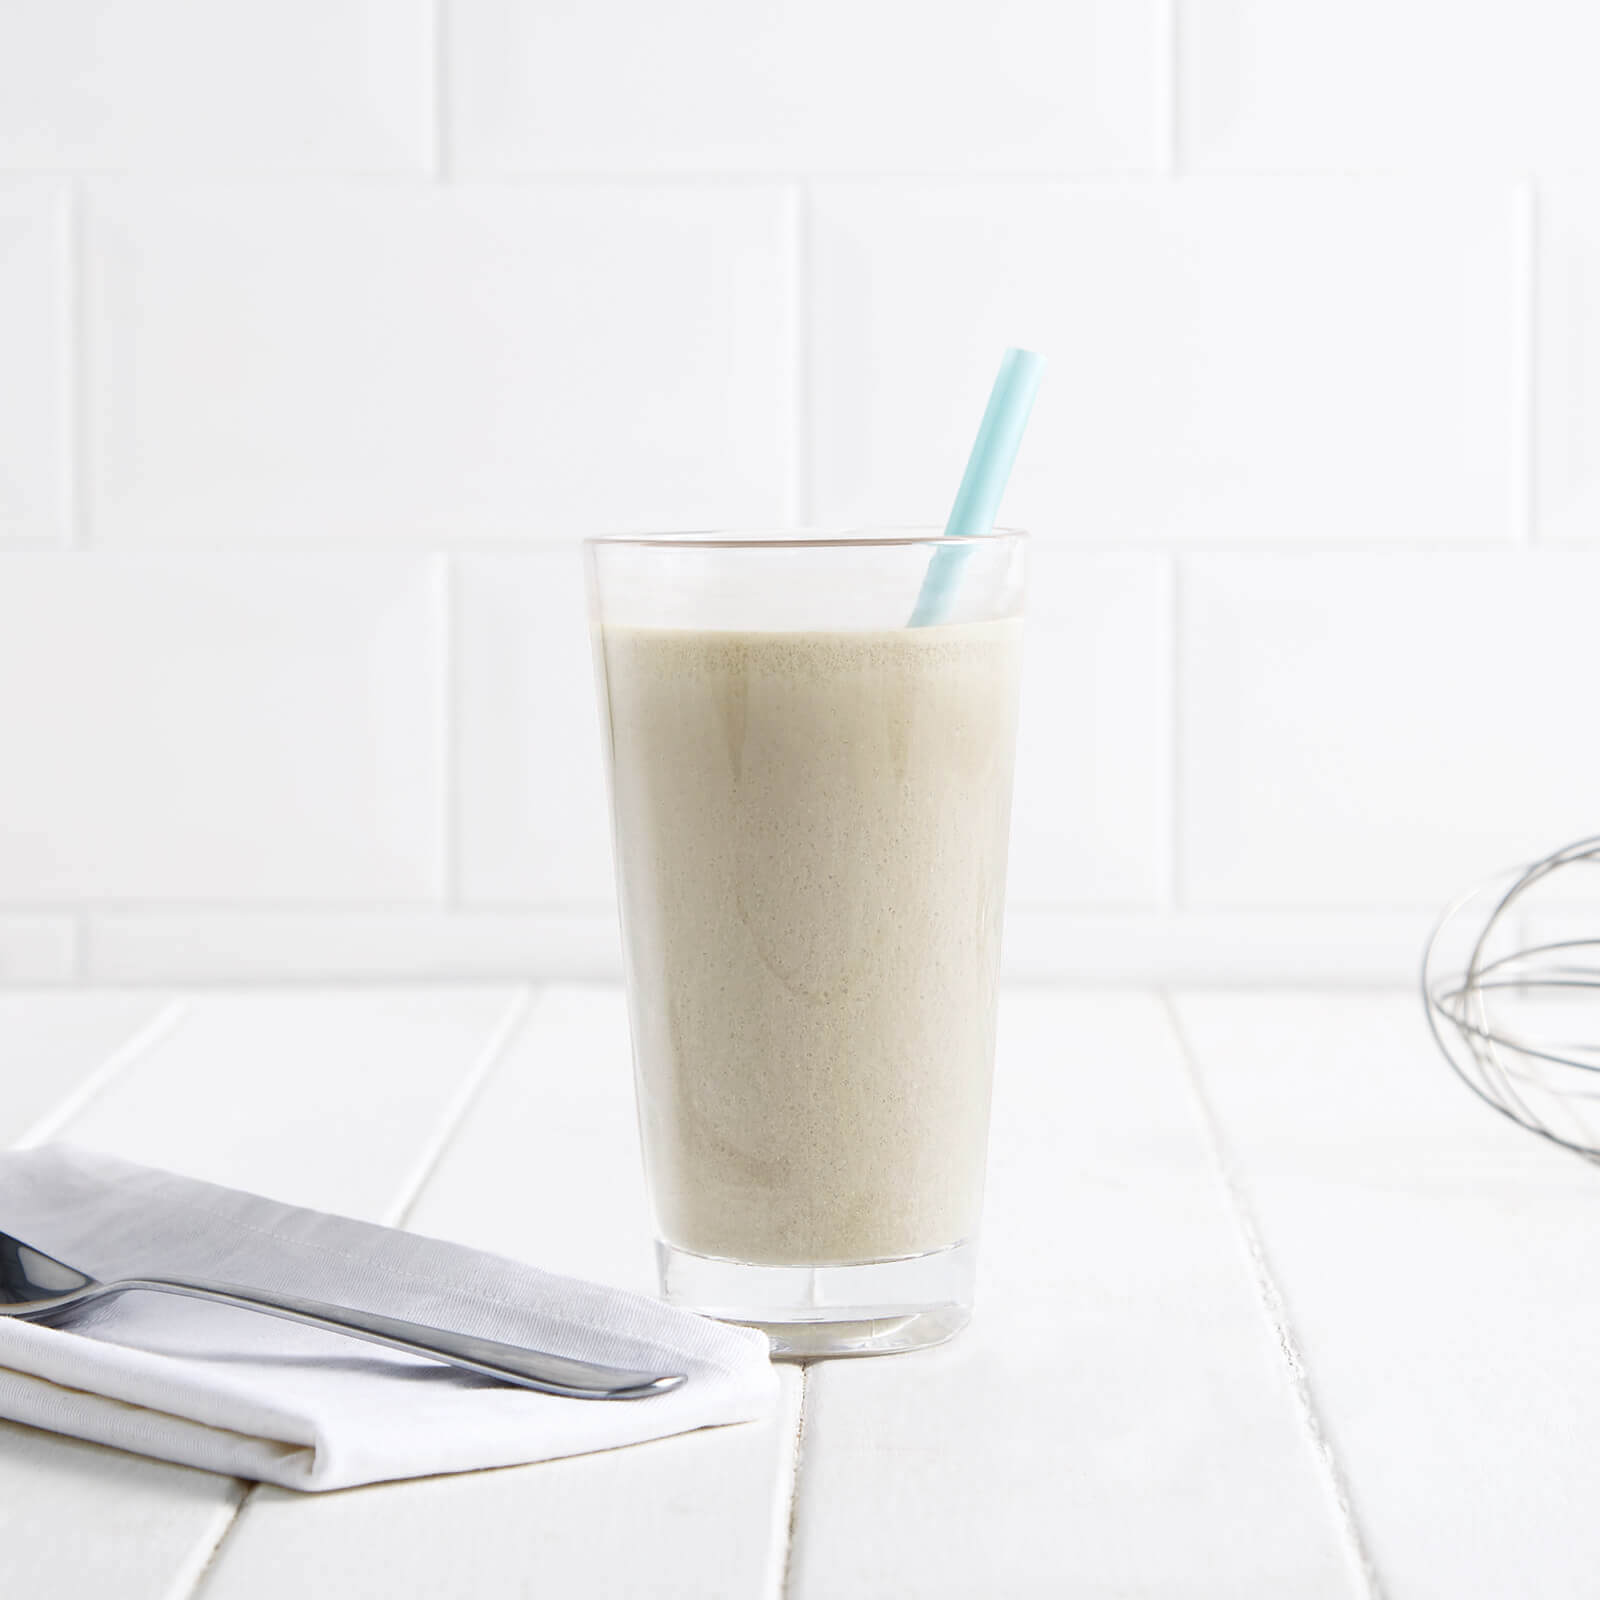 Exante Diet Meal Replacement Salted Caramel Shake